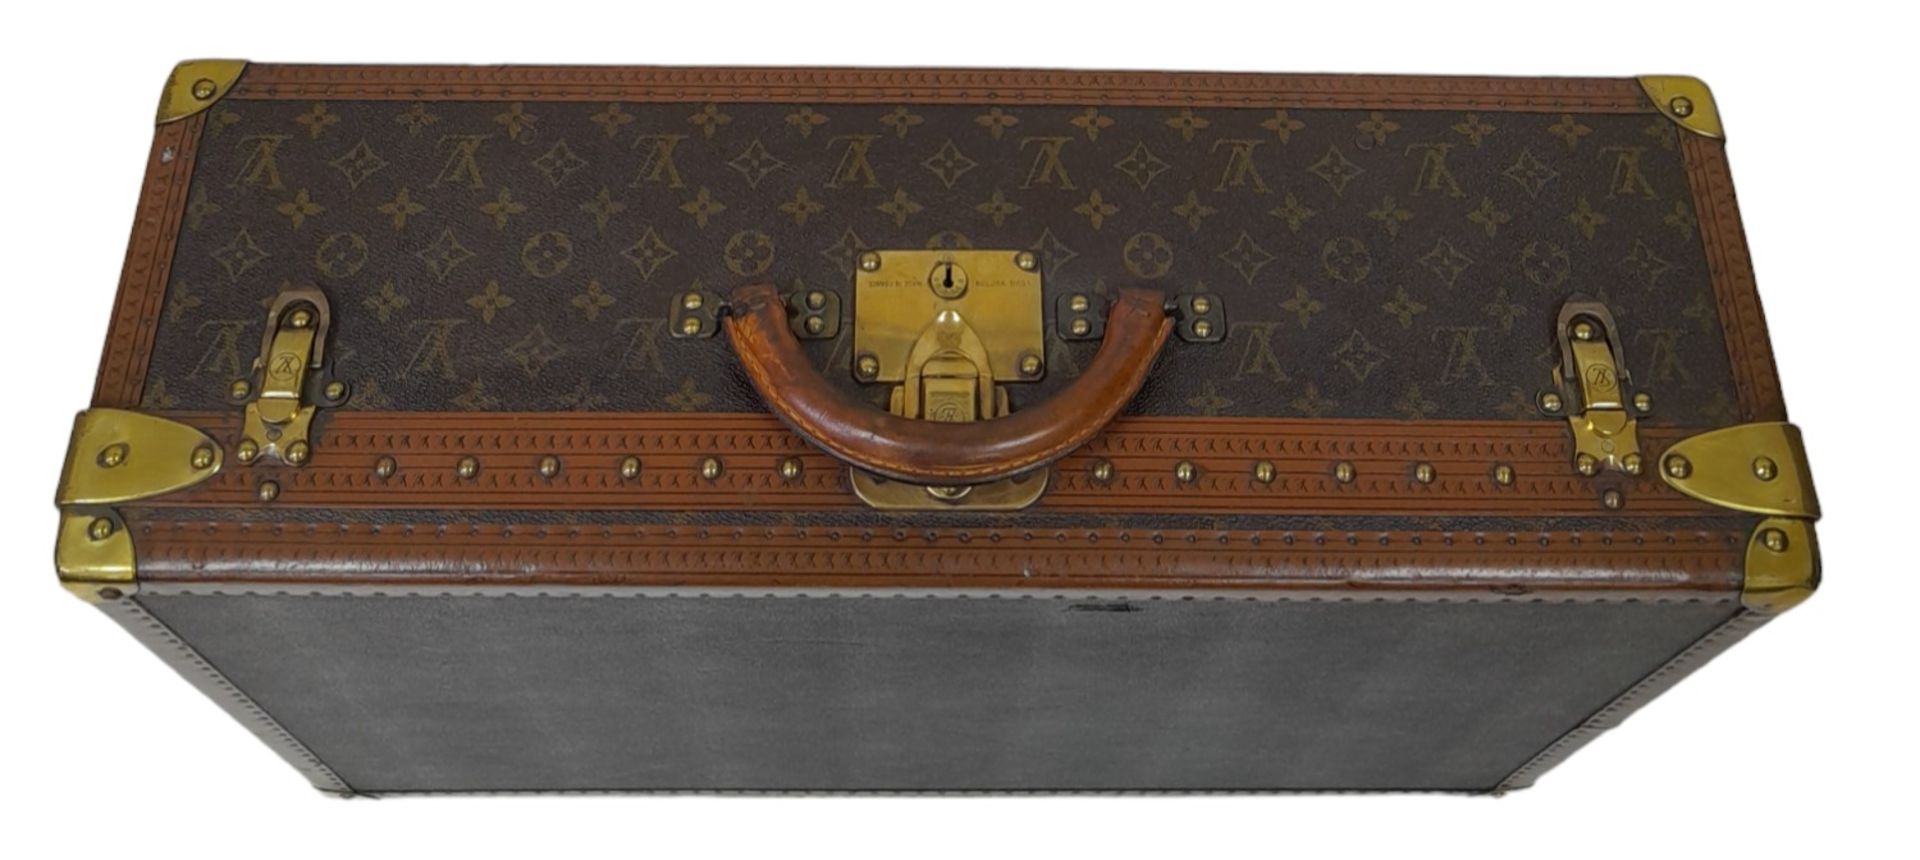 A Vintage Possibly Antique Louis Vuitton Trunk/Hard Suitcase. The smaller brother of Lot 38! - Image 3 of 12